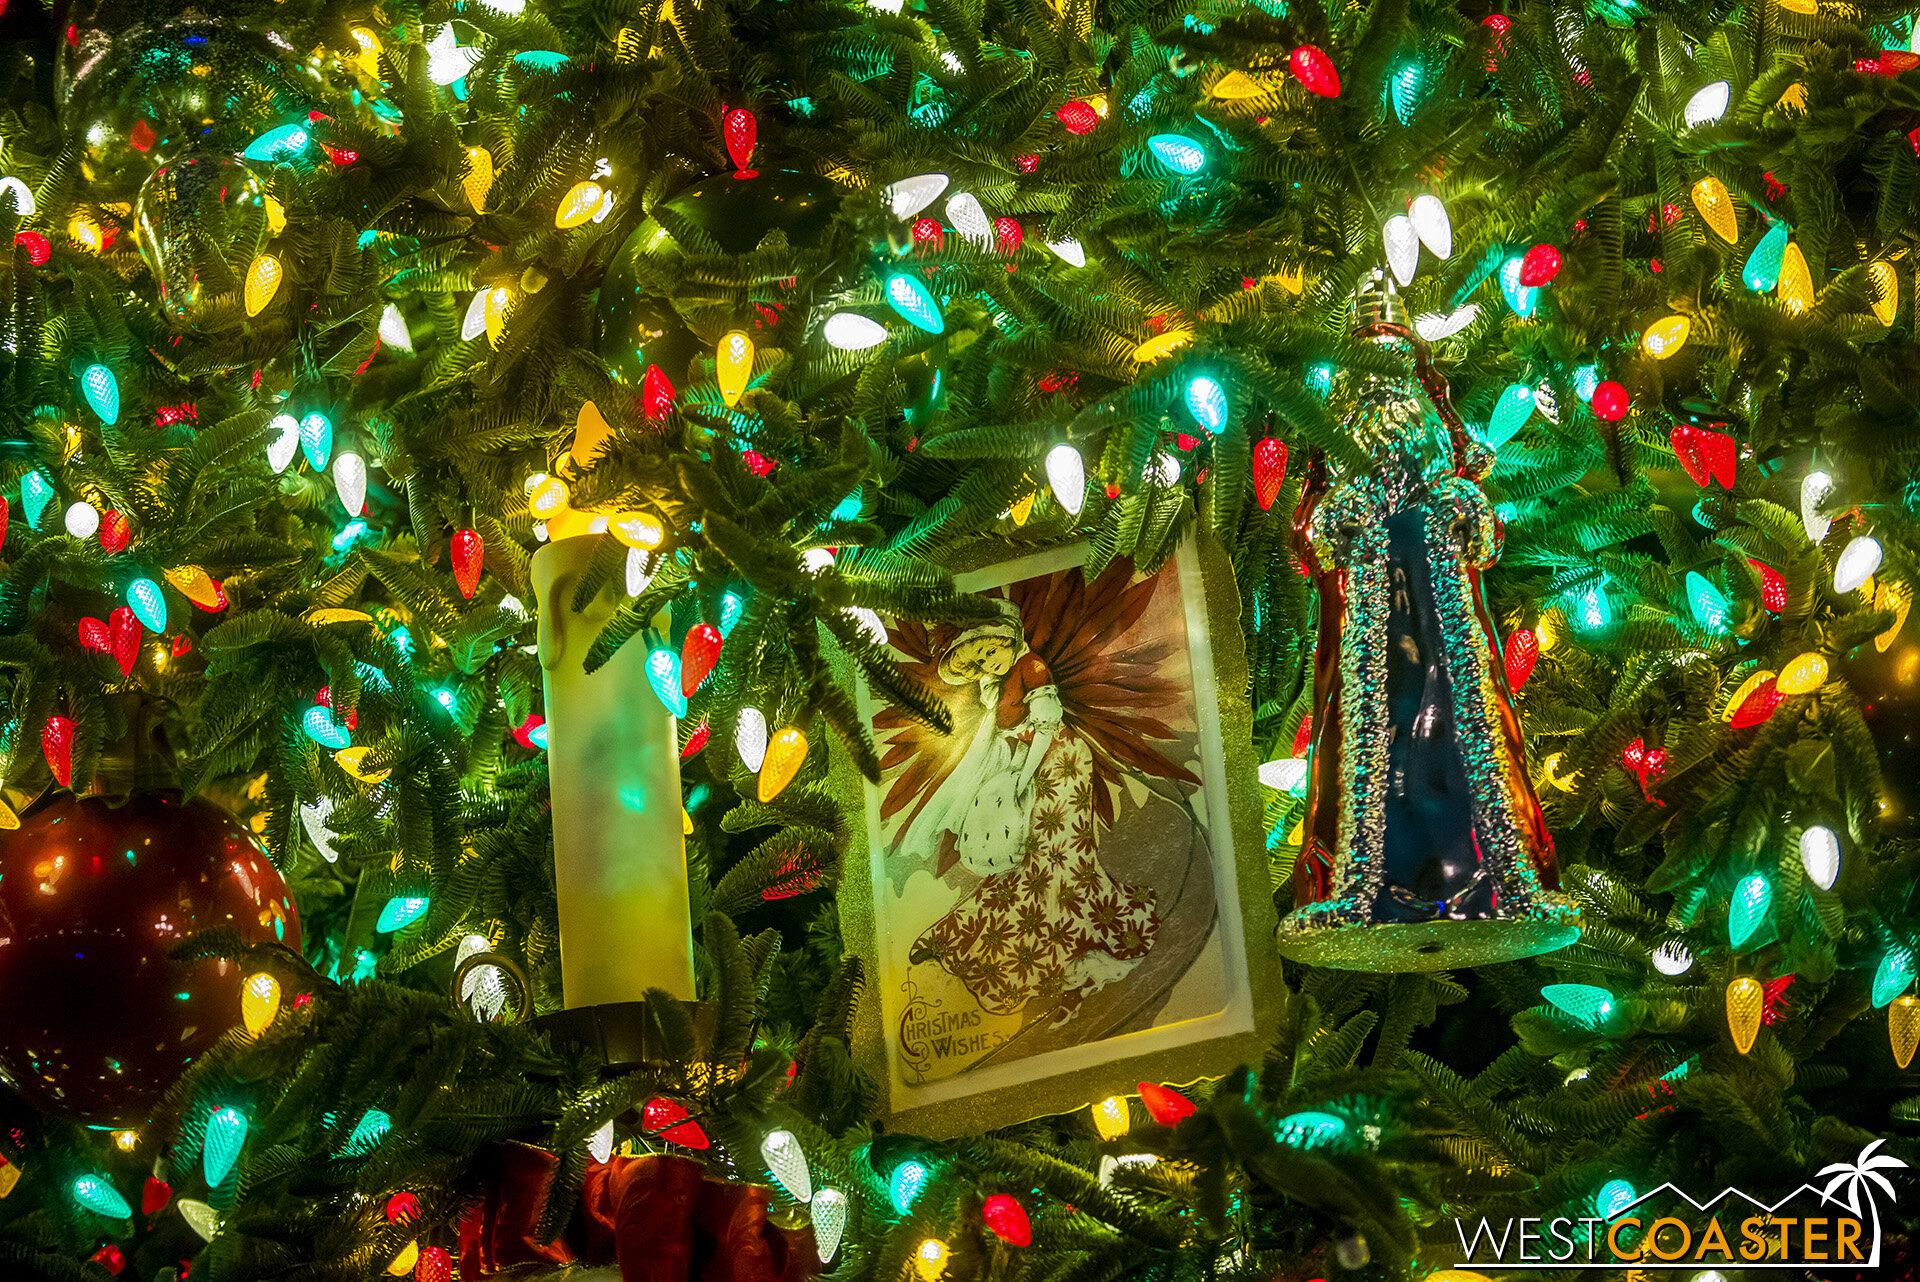  Classic ornaments on the tree. 